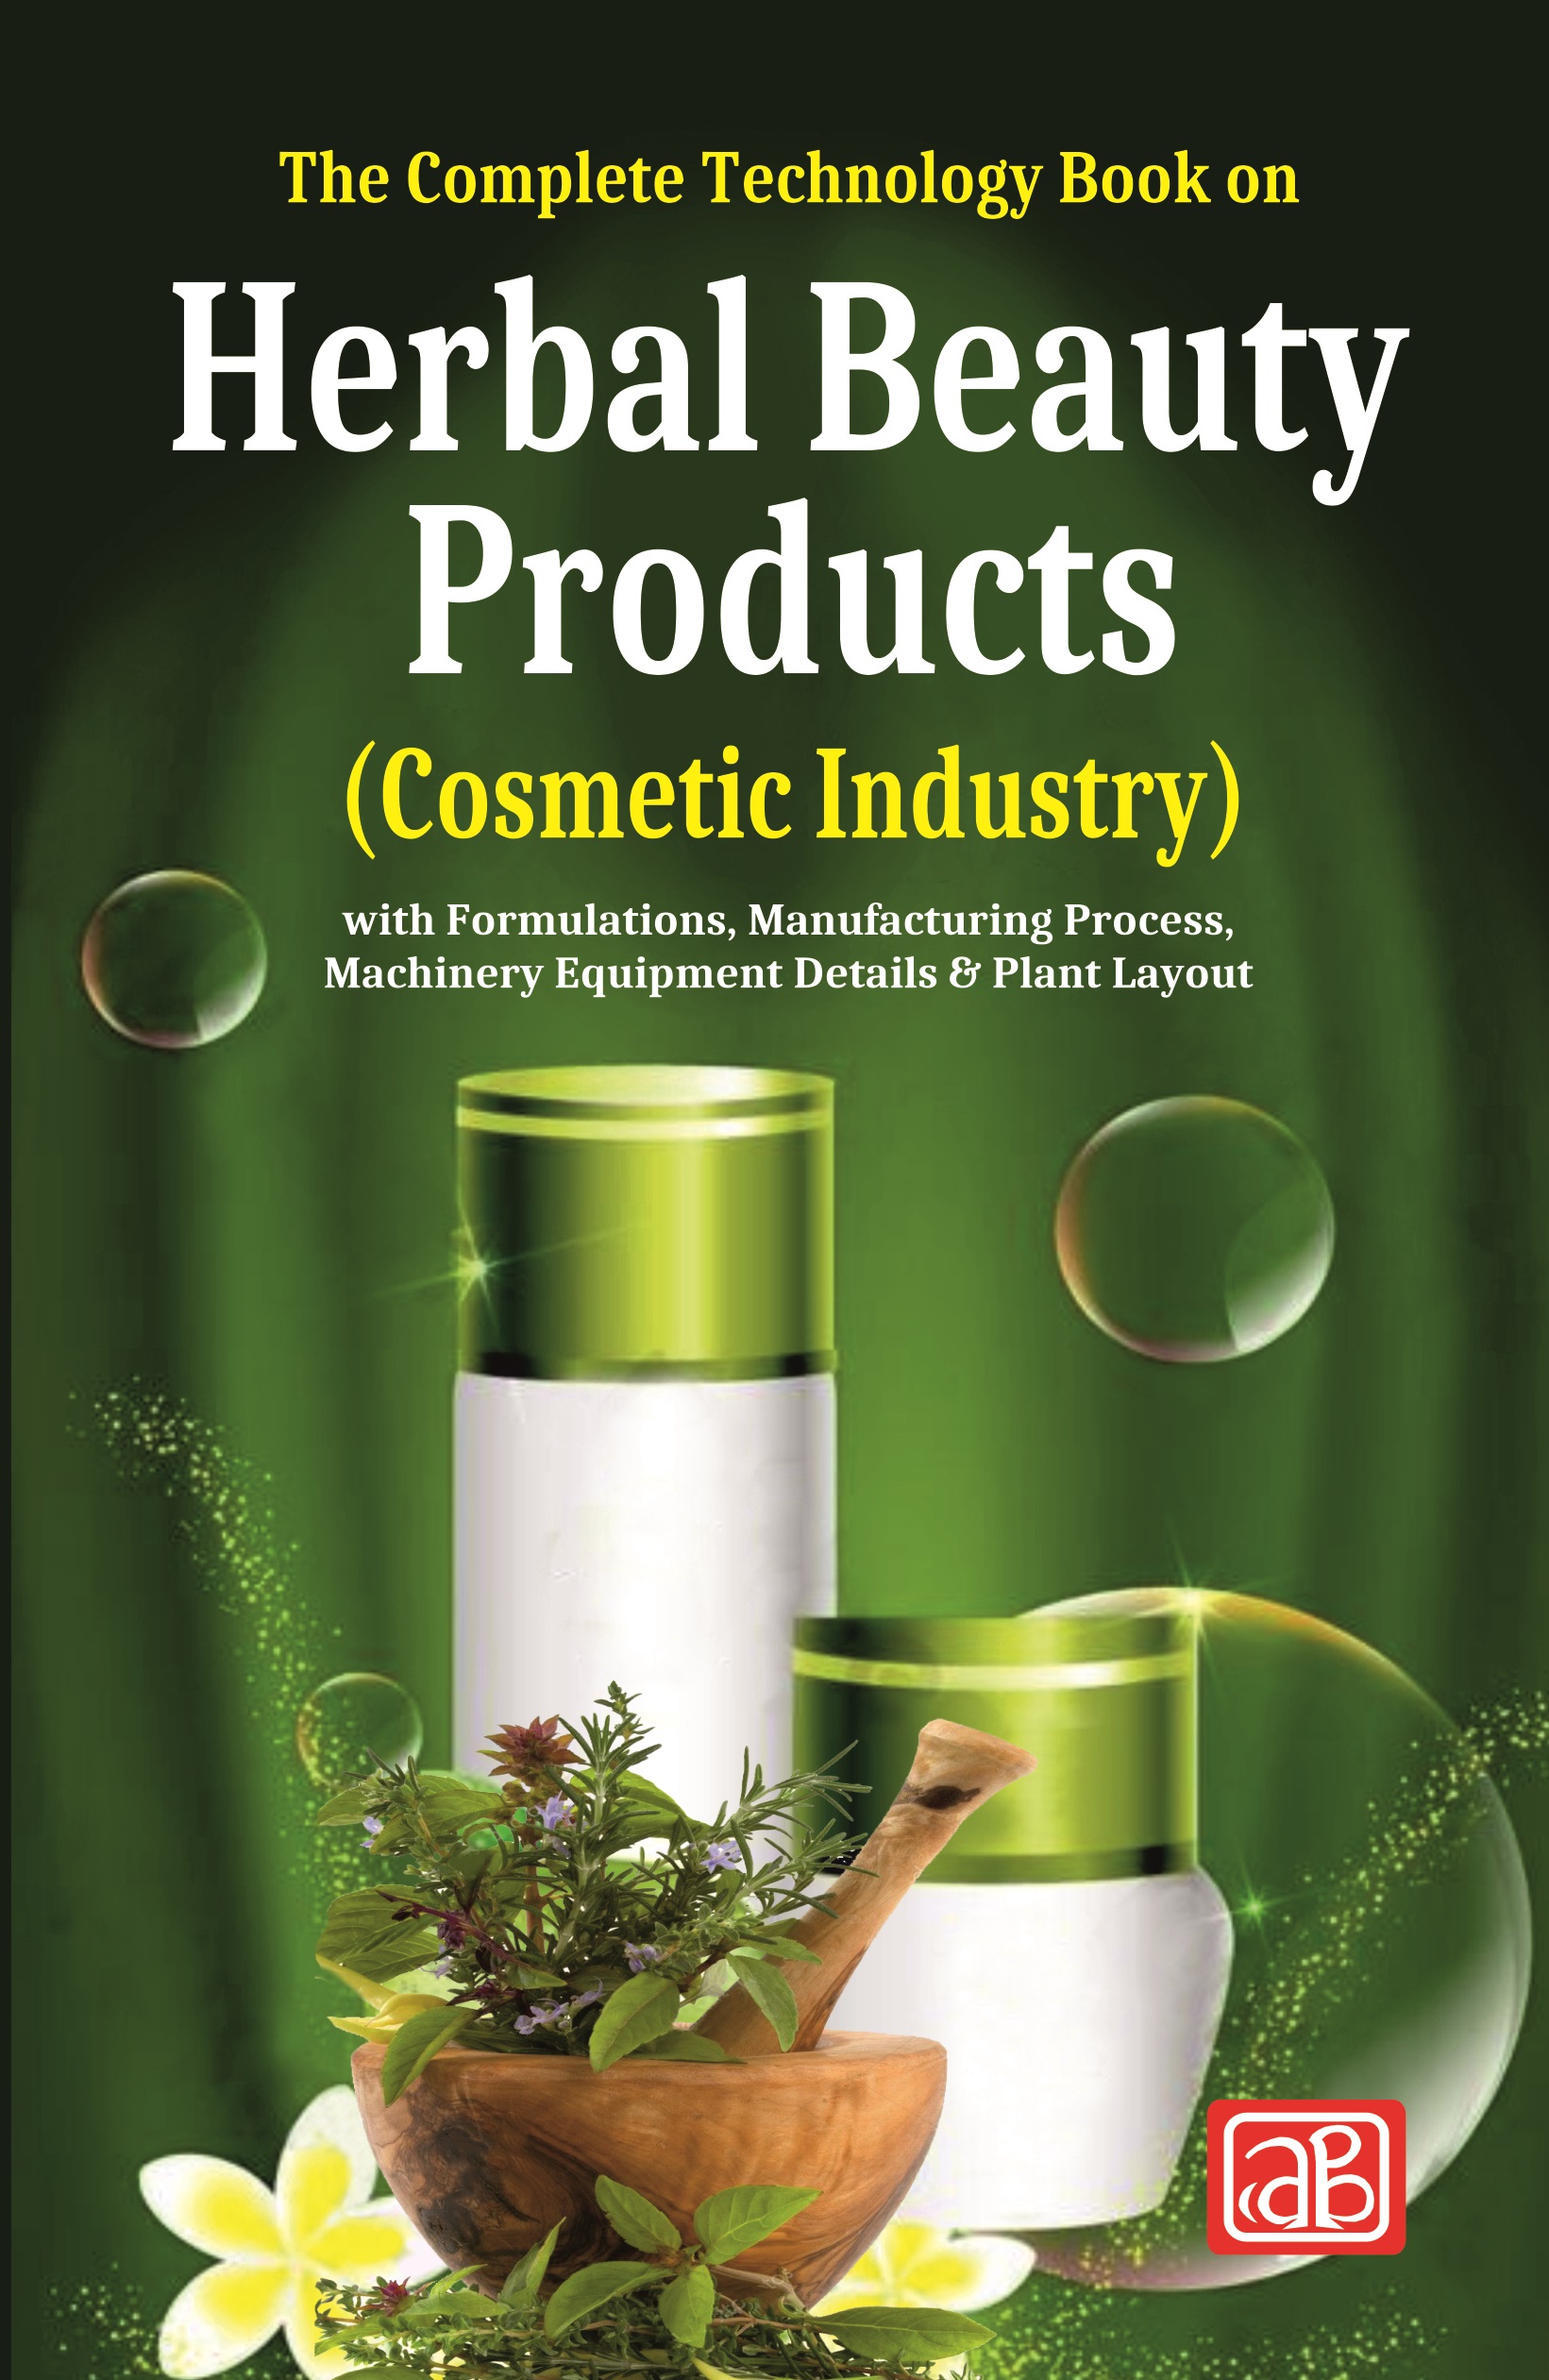 The Complete Technology Book on Herbal Beauty Products (Cosmetic Industry) with Formulations, Manufacturing Process, Machinery Equipment Details & Plant Layout (2nd Edition)